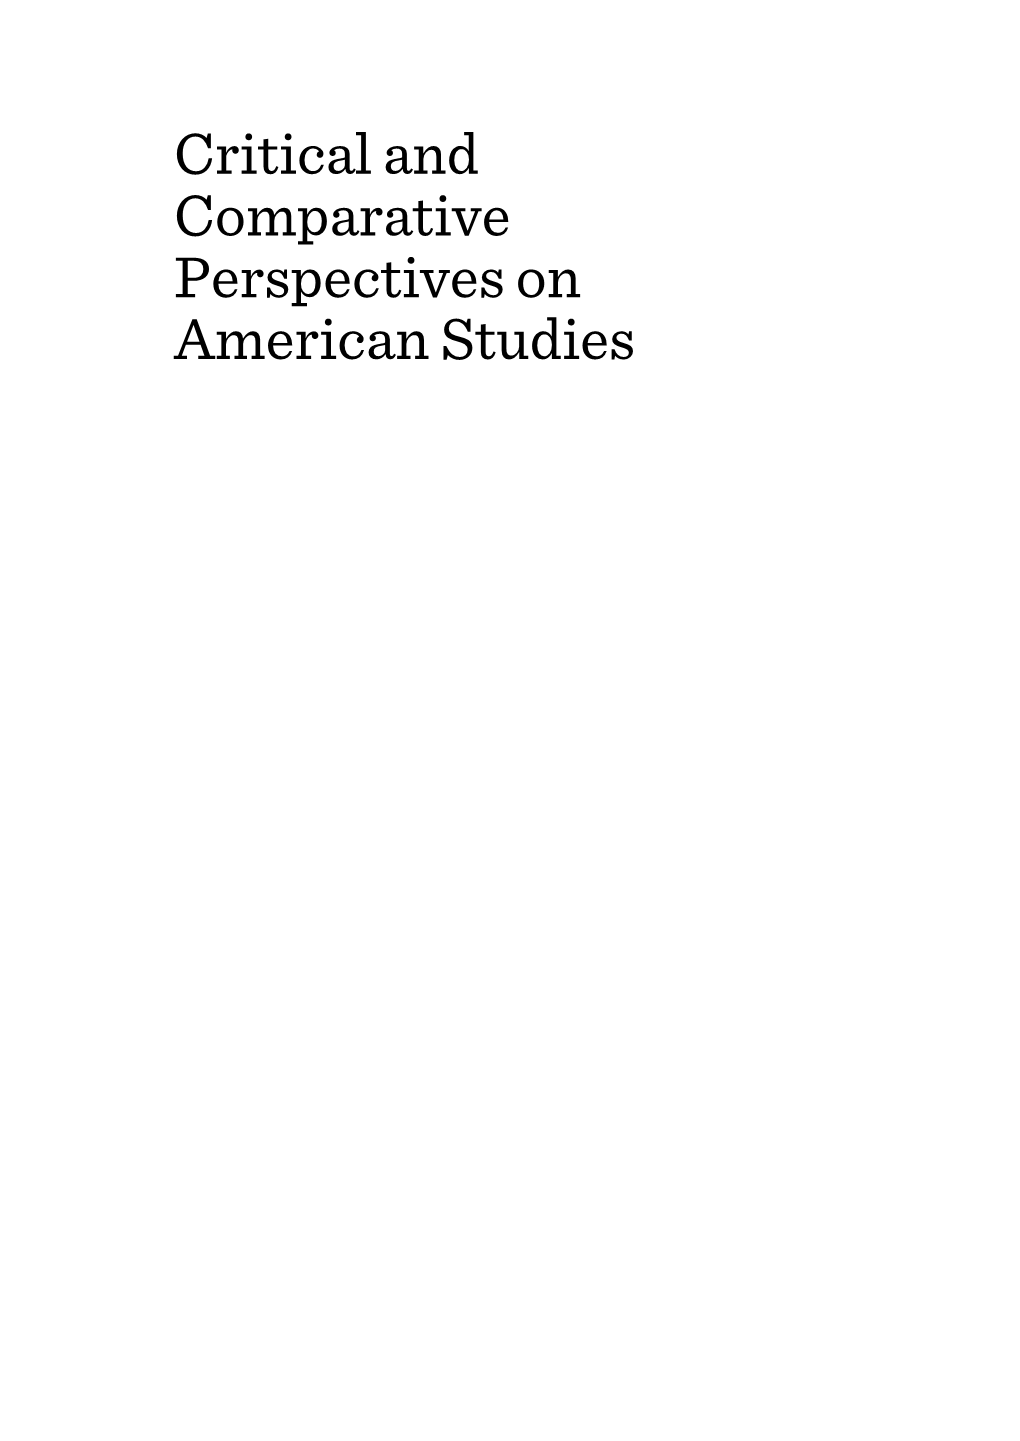 Critical and Comparative Perspectives on American Studies